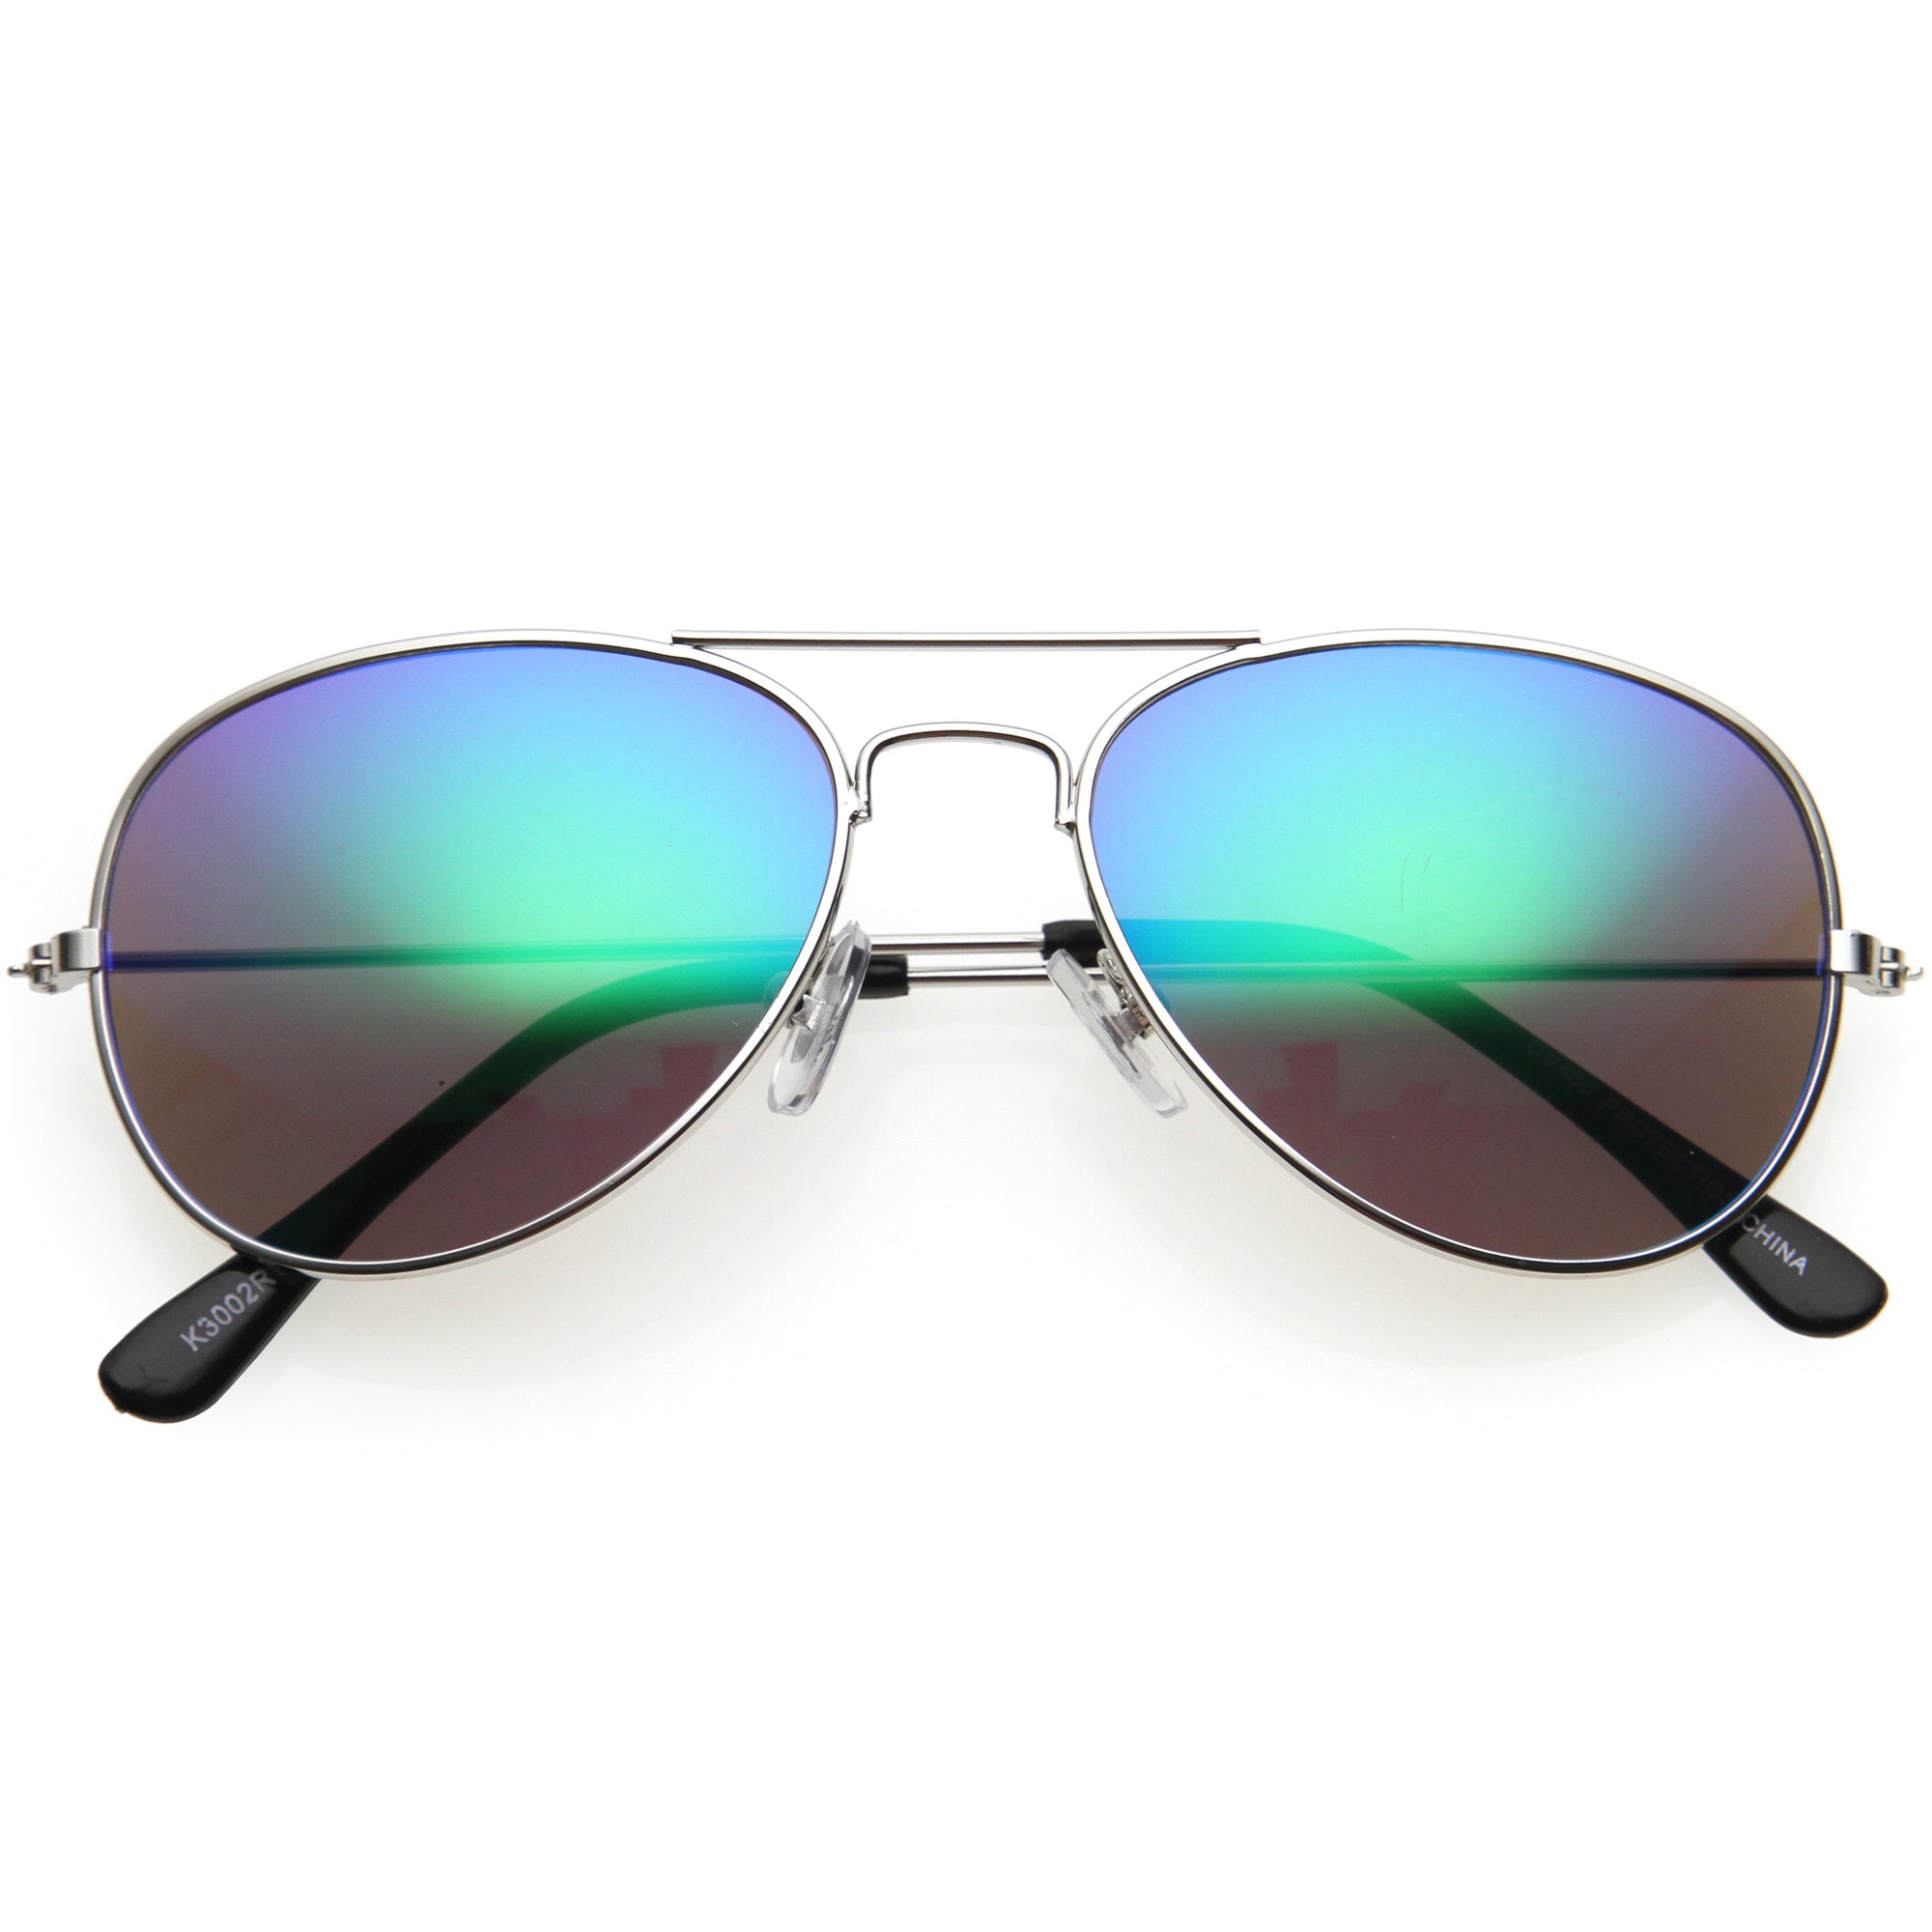 Premium Photo | A pair of sunglasses with rainbow colored lenses and a  silver clasp.